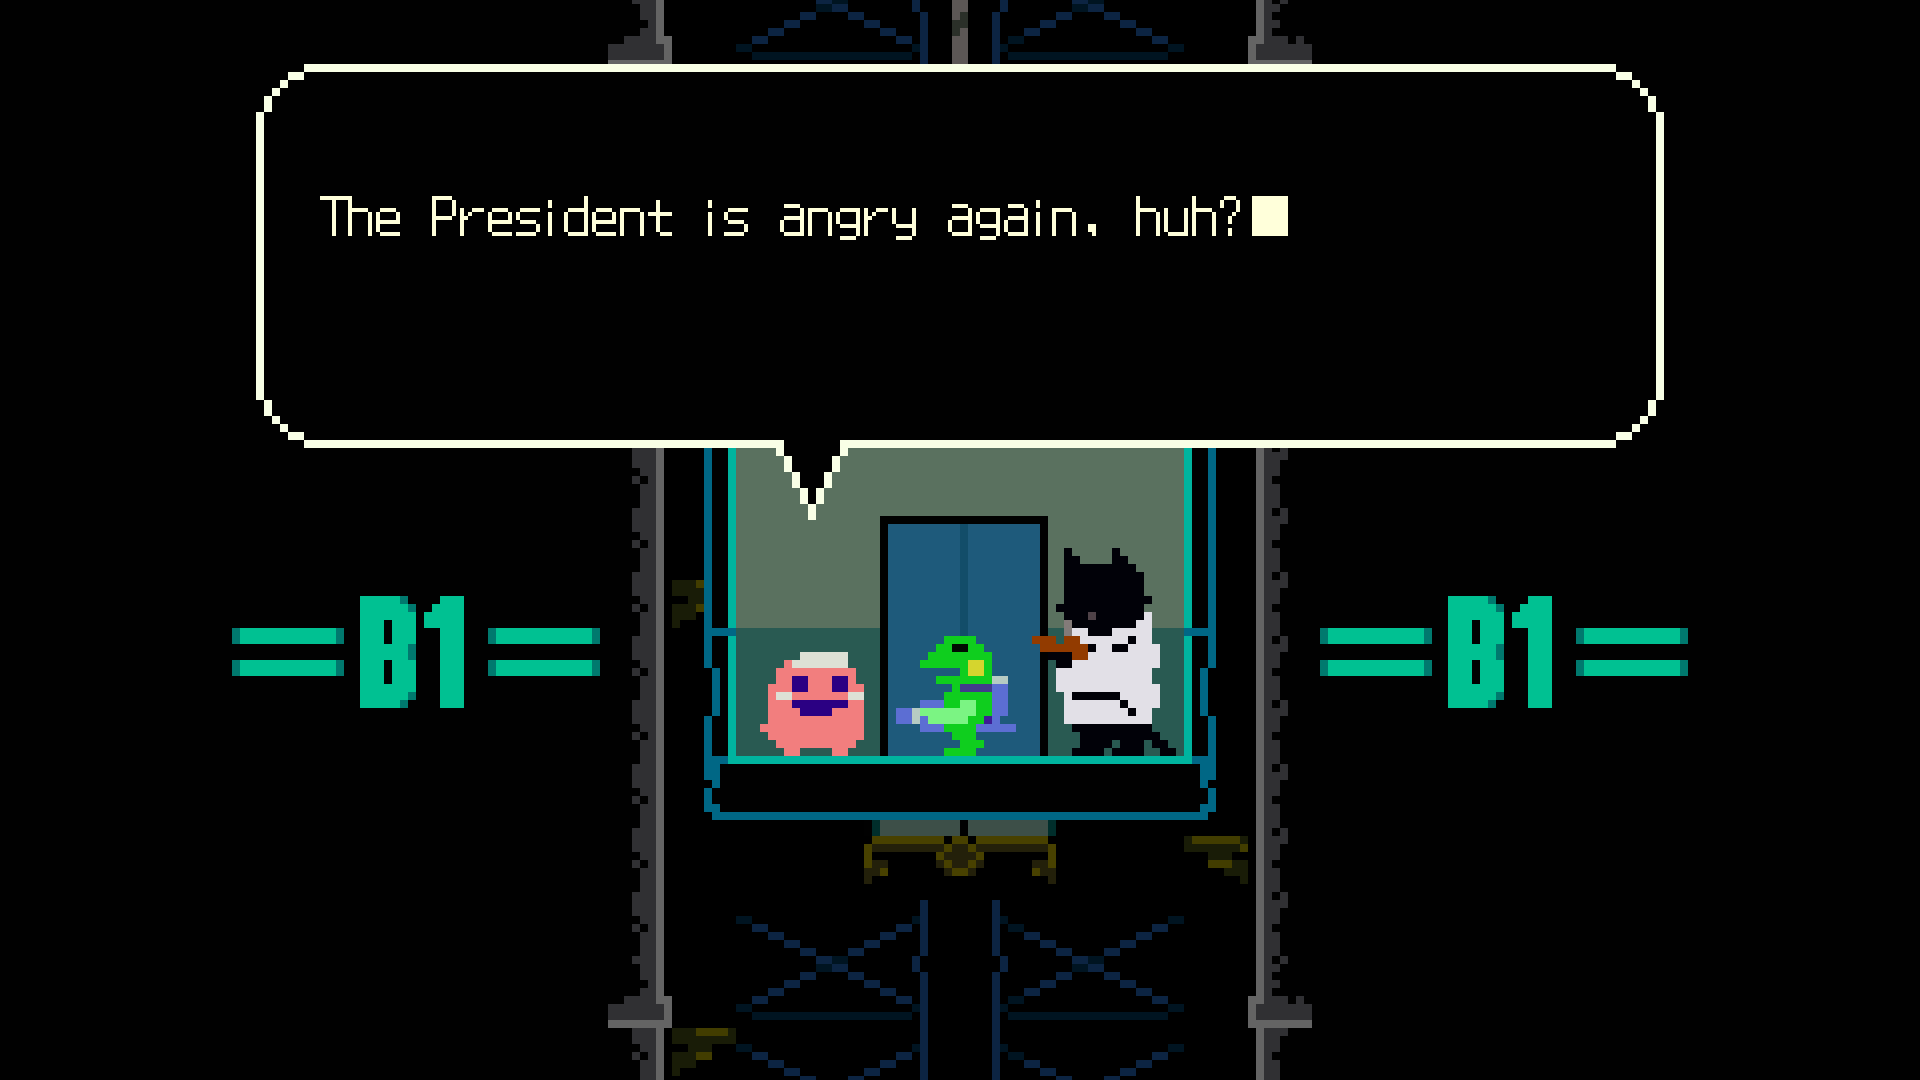 Kero Blaster Ps4 New You Are A Frog Head of Custodial Services